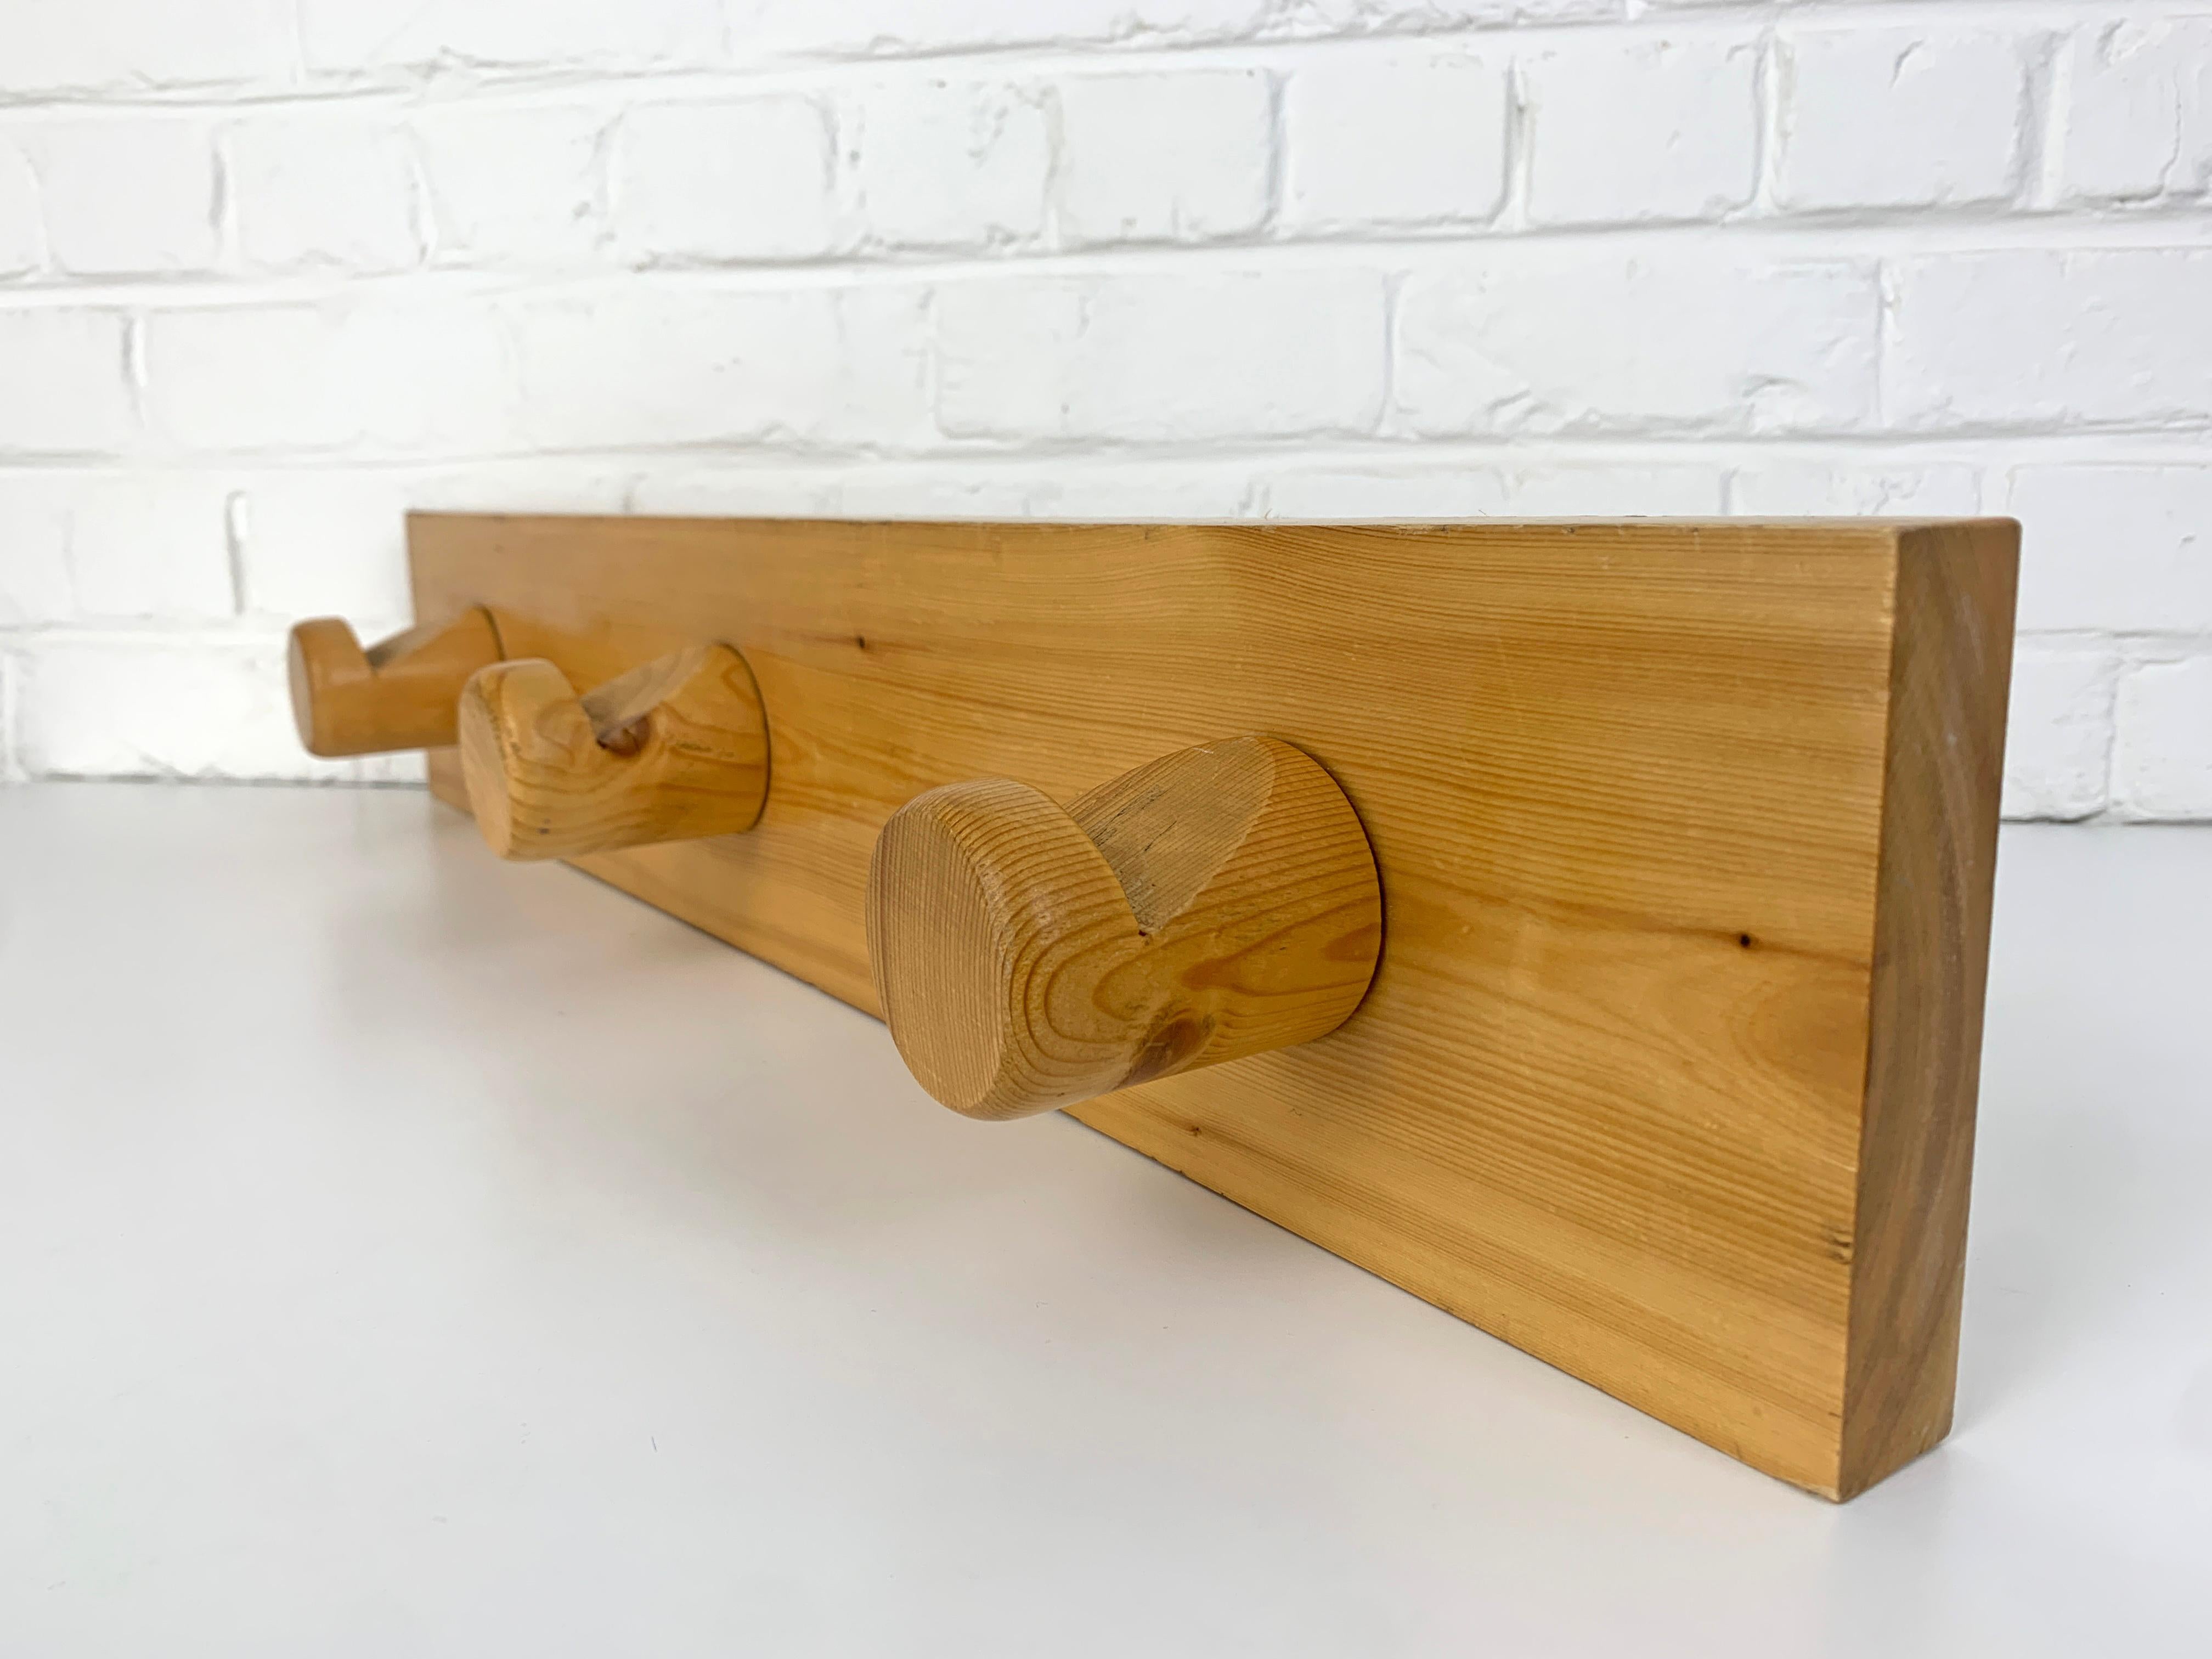 20th Century French Coat Rack by Charlotte Perriand for Les Arcs, Pinewood, 1960s - 3 avail. For Sale